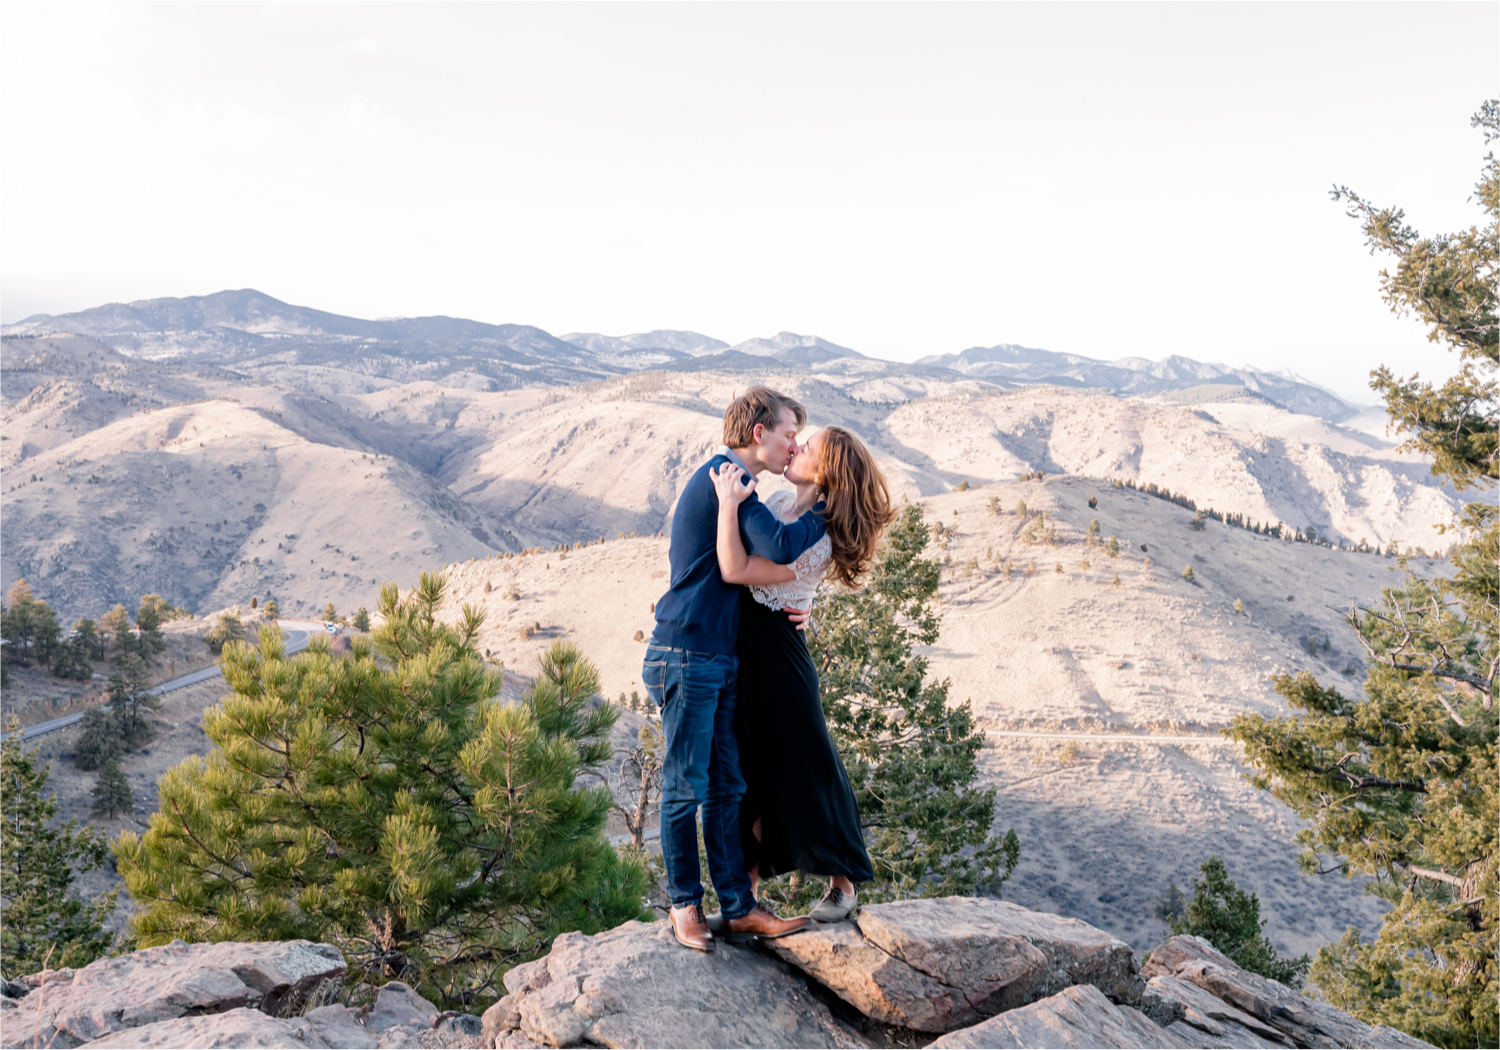 Winter Engagement on Lookout Mountain in Golden Colorado | Britni Girard Photography | Destination Photo and Video Team | Epic views of Golden, dreamy sunsets, dancing and snuggles.  A sweet couple shares time of prayer together during their romantic engagement session.